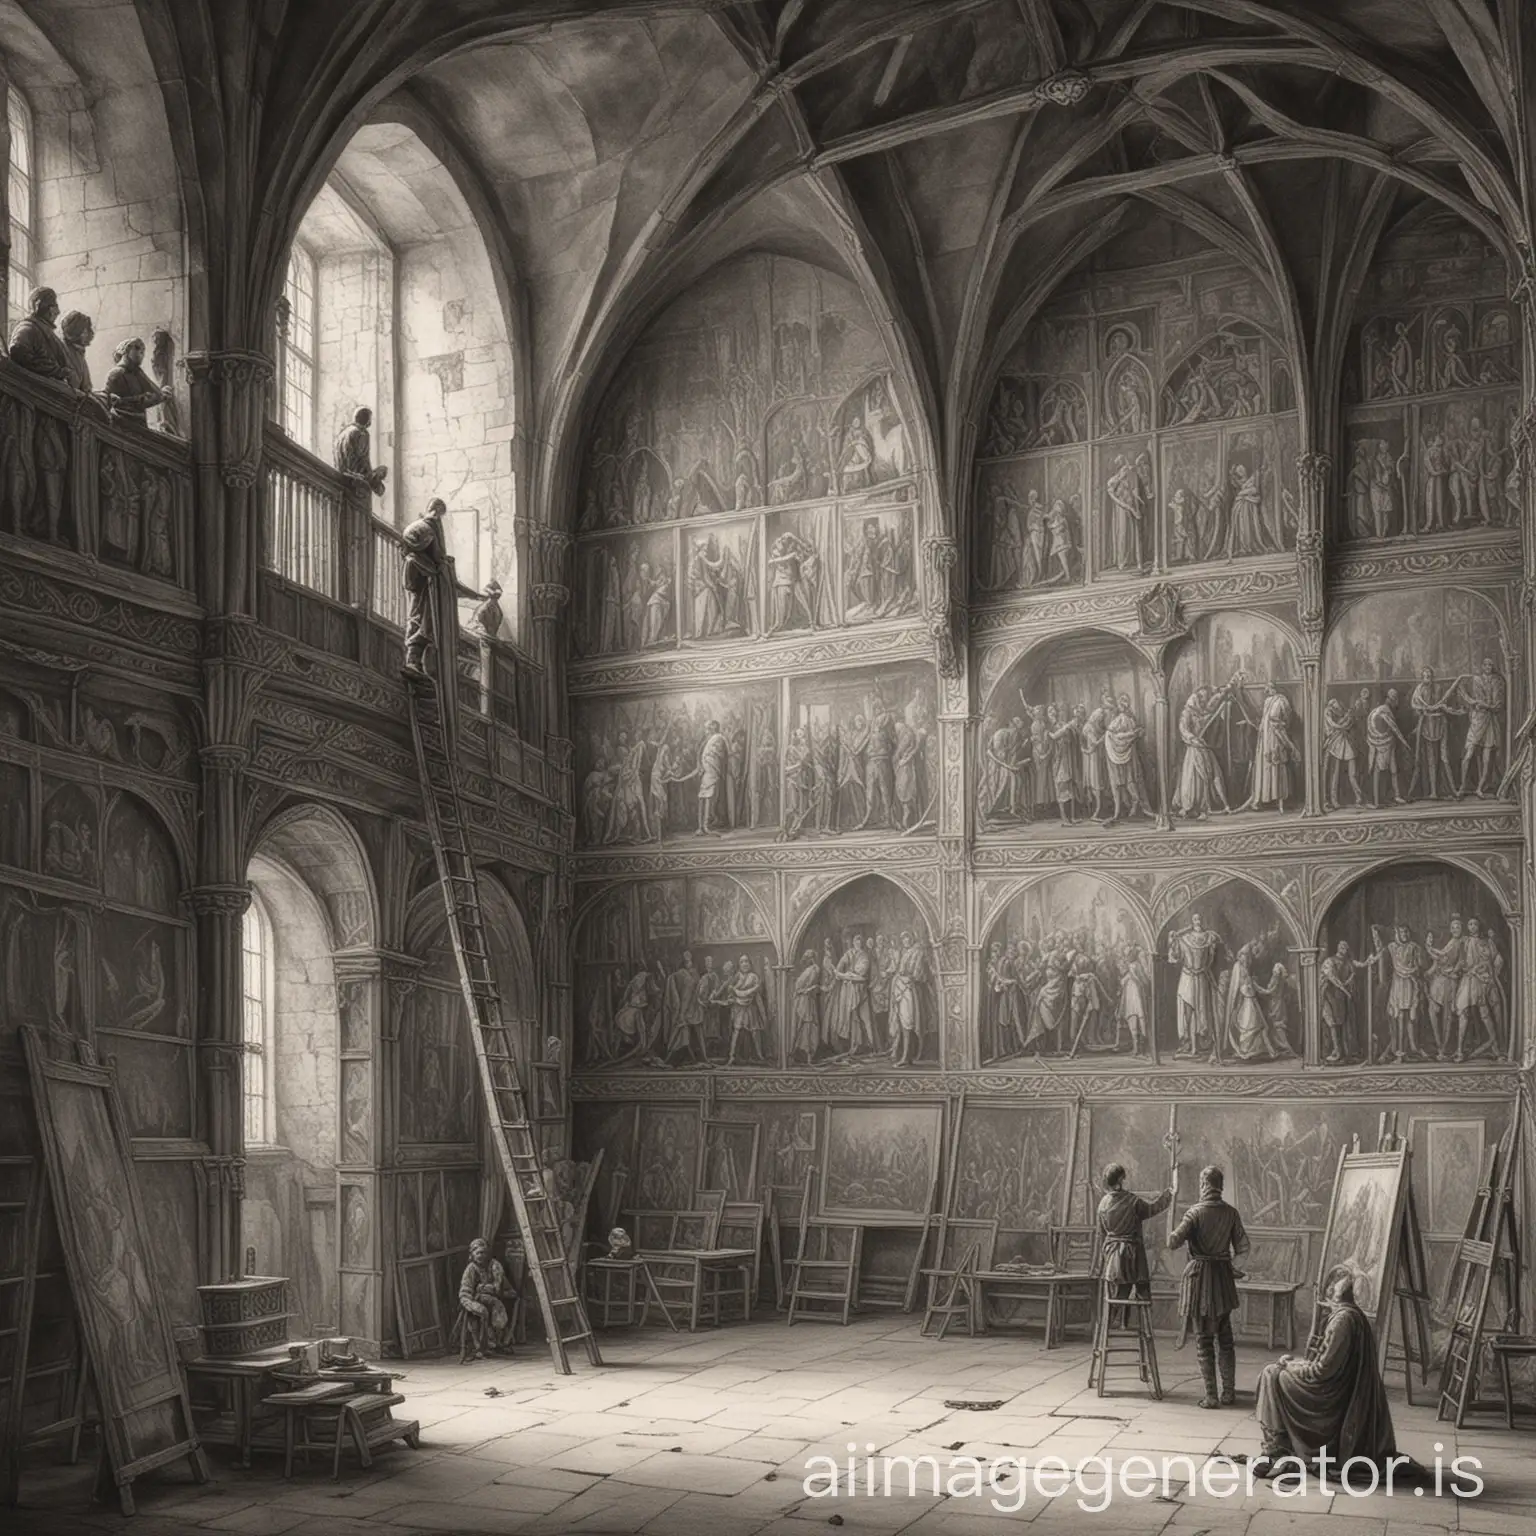 A black and white pencil sketch of  a medieval royal hall with a painter painting a wall while standing on a ladder